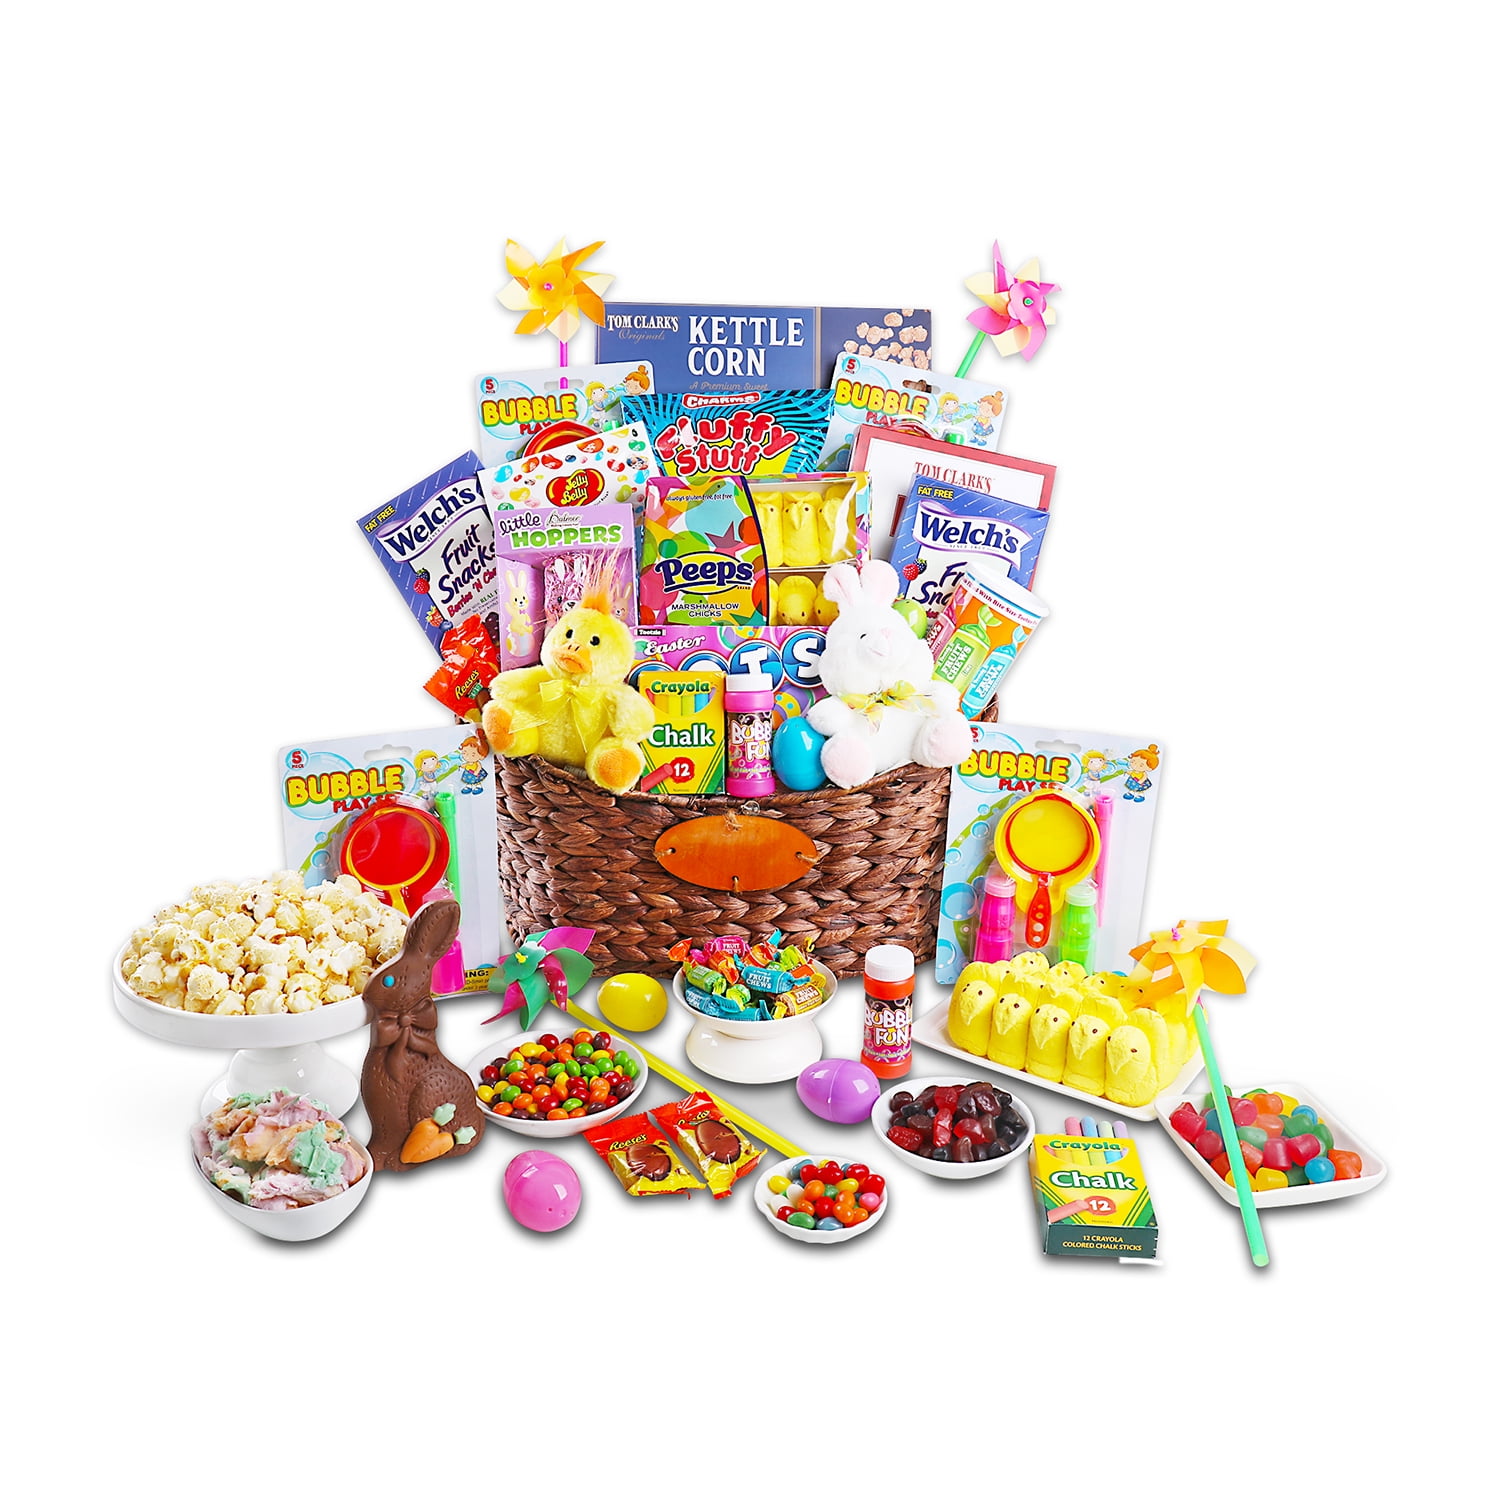 Fishing Adventure Filled Easter Basket with Candies, by Wondertreats